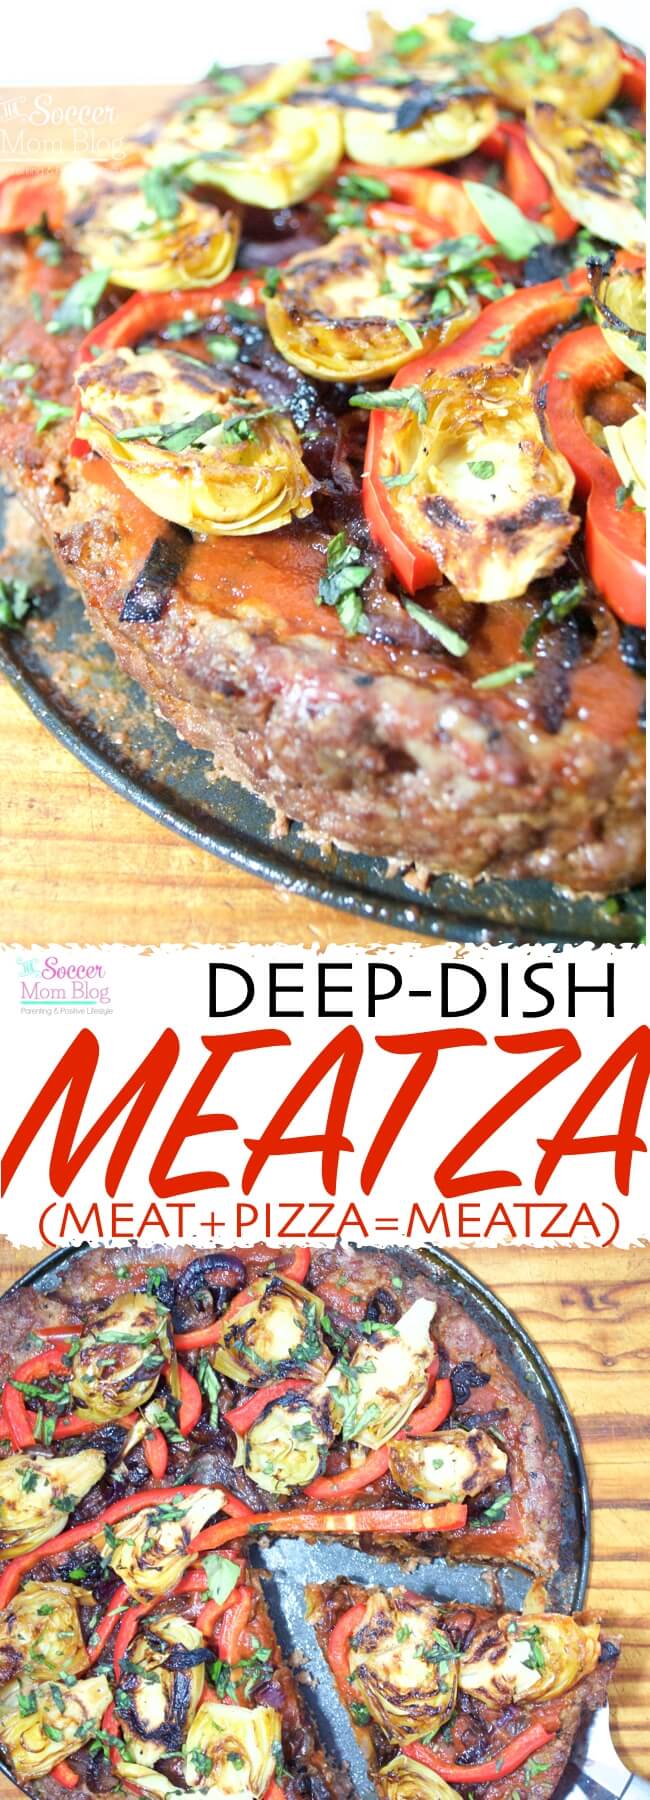 Meat-lovers: THIS is your pizza! This Deep-dish Meatza is PACKED with protein and topped with perfectly caramelized veggies - it's supremely satisfying! Gluten free, dairy free, low-carb - it's a healthy pizza alternative!